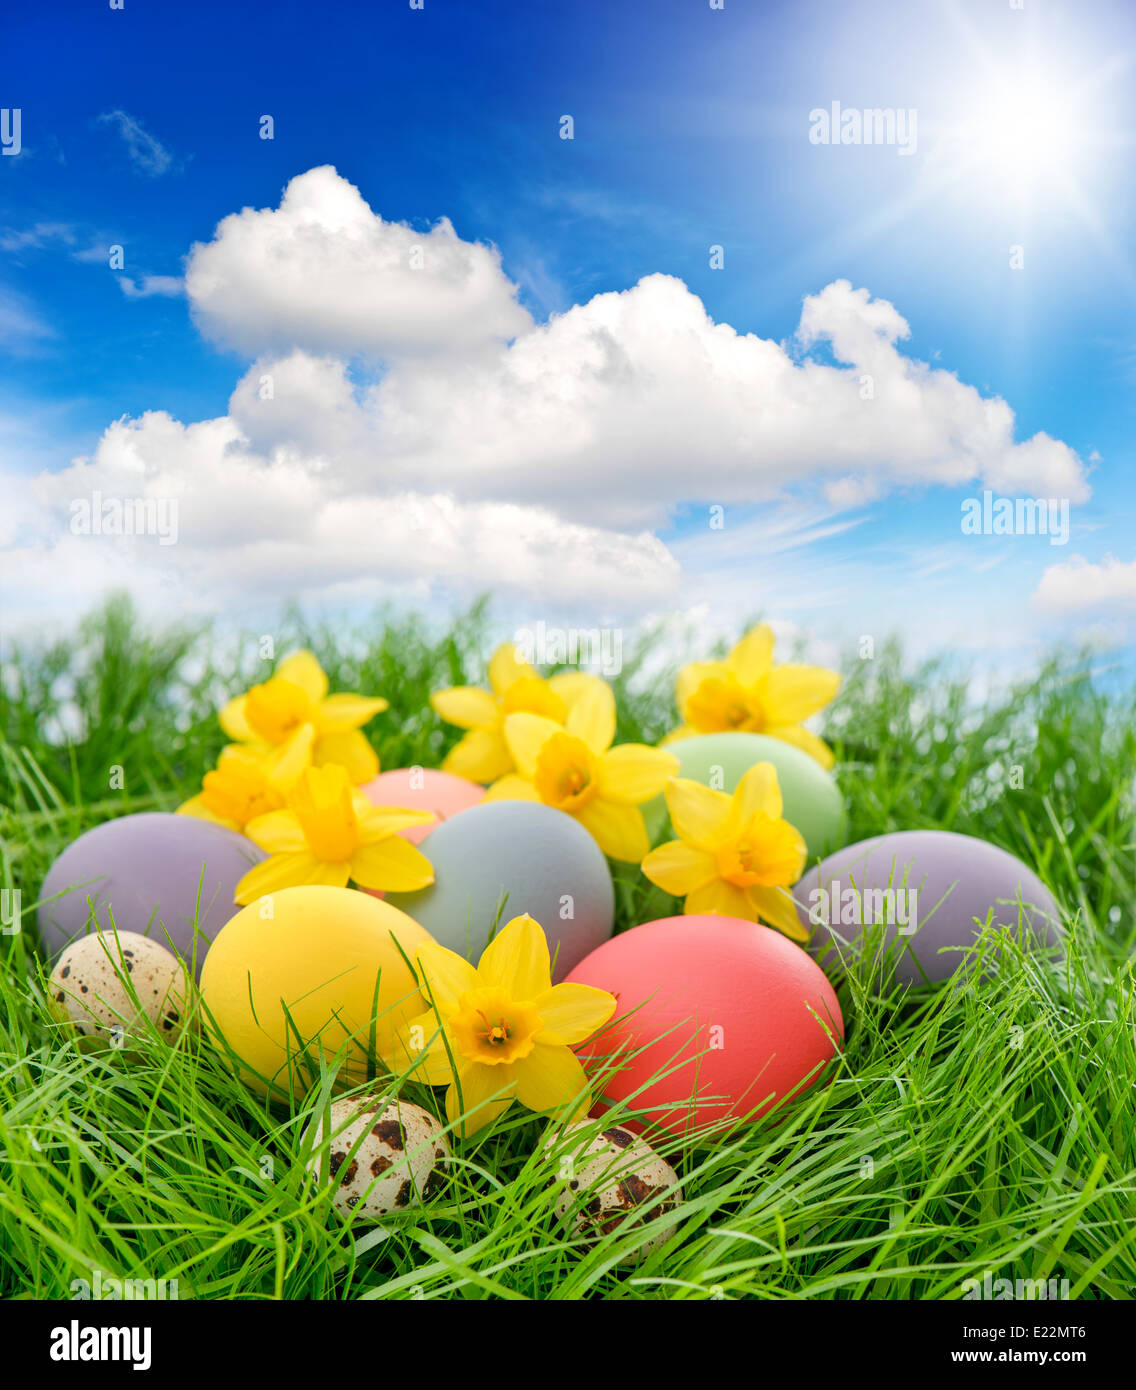 easter eggs and daffodils flowers in grass over sunny blue sky Stock Photo